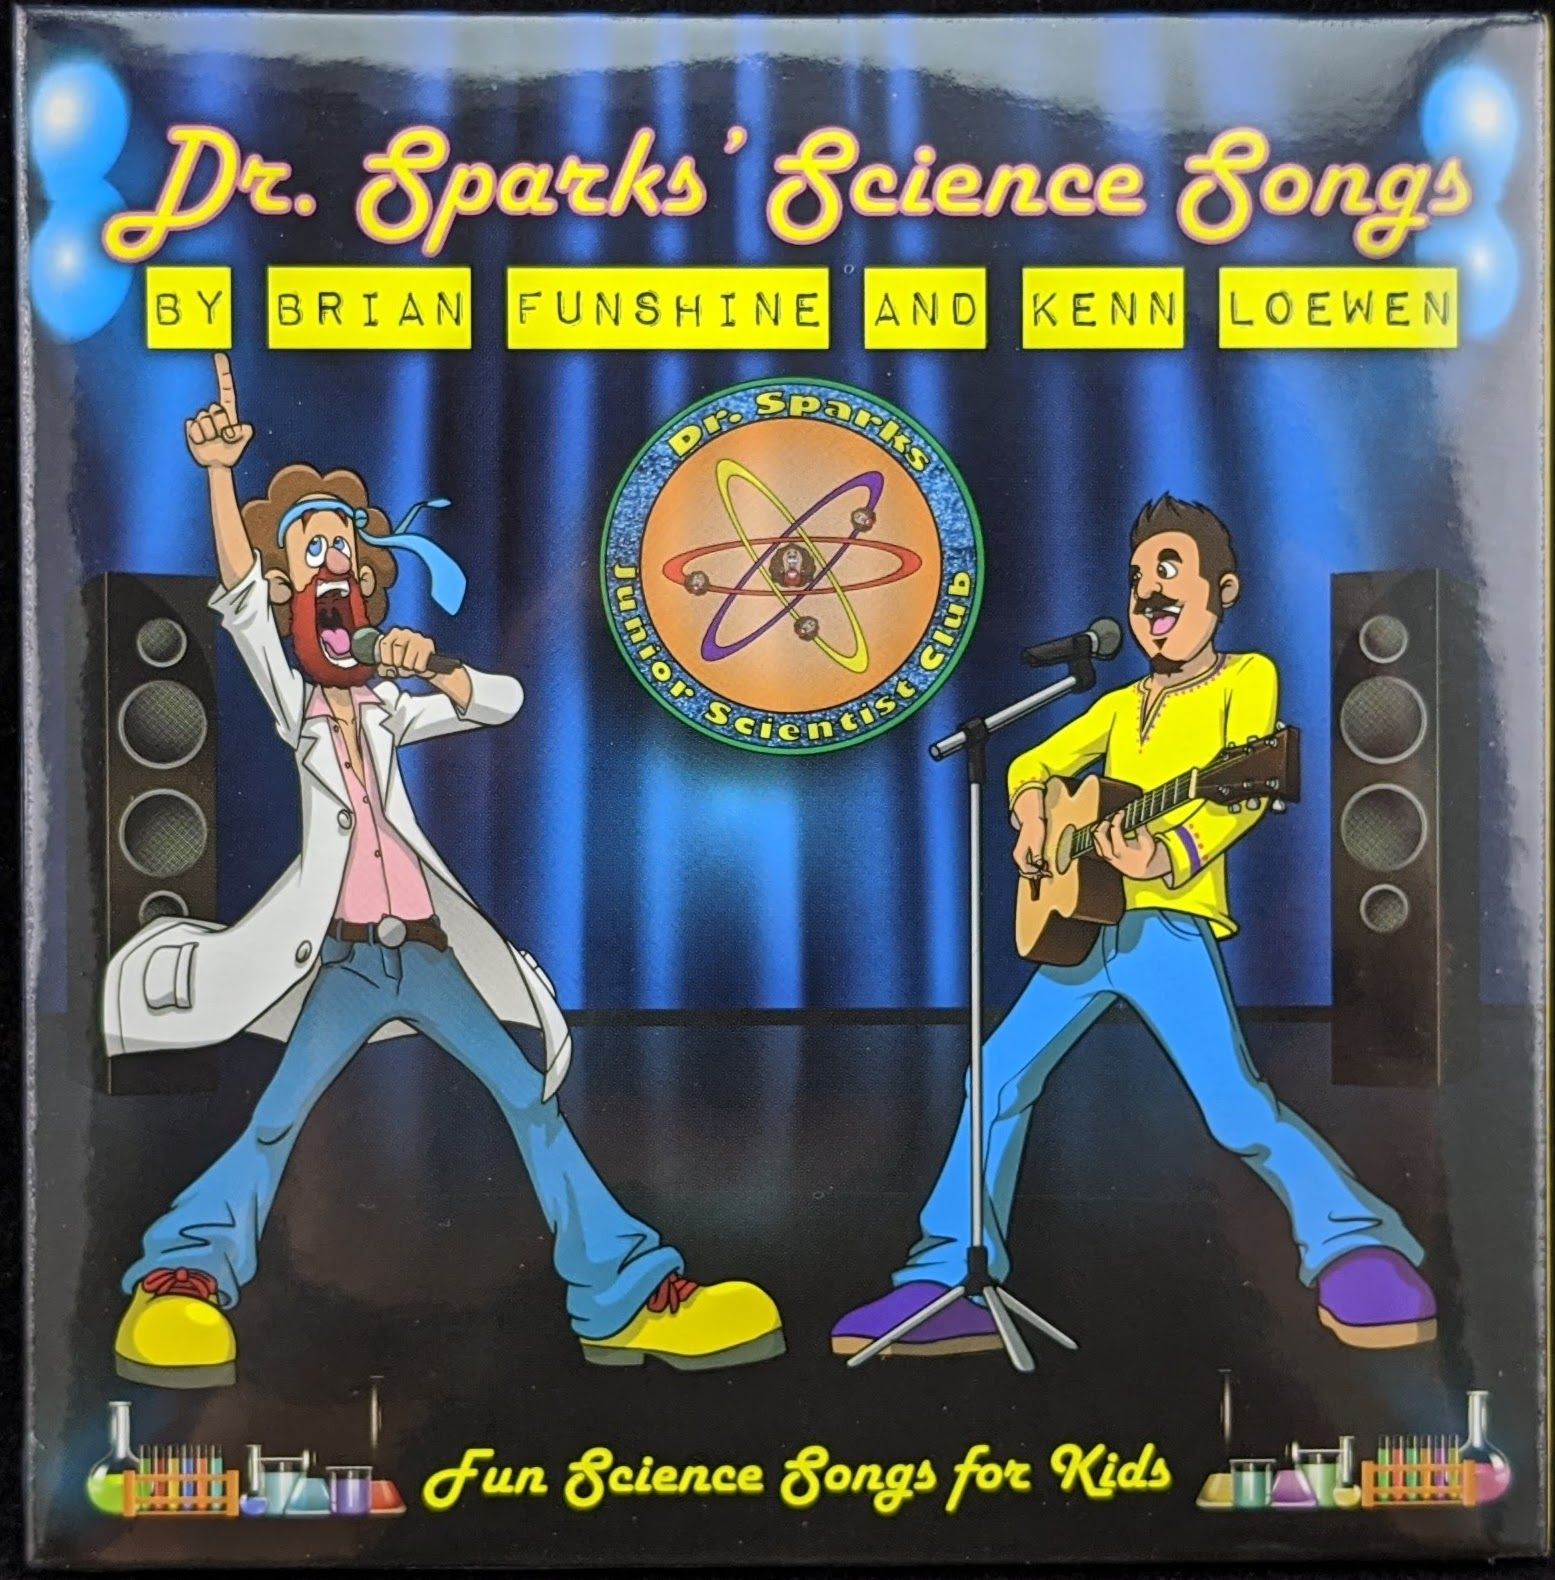 Dr. S parks’ Science songs